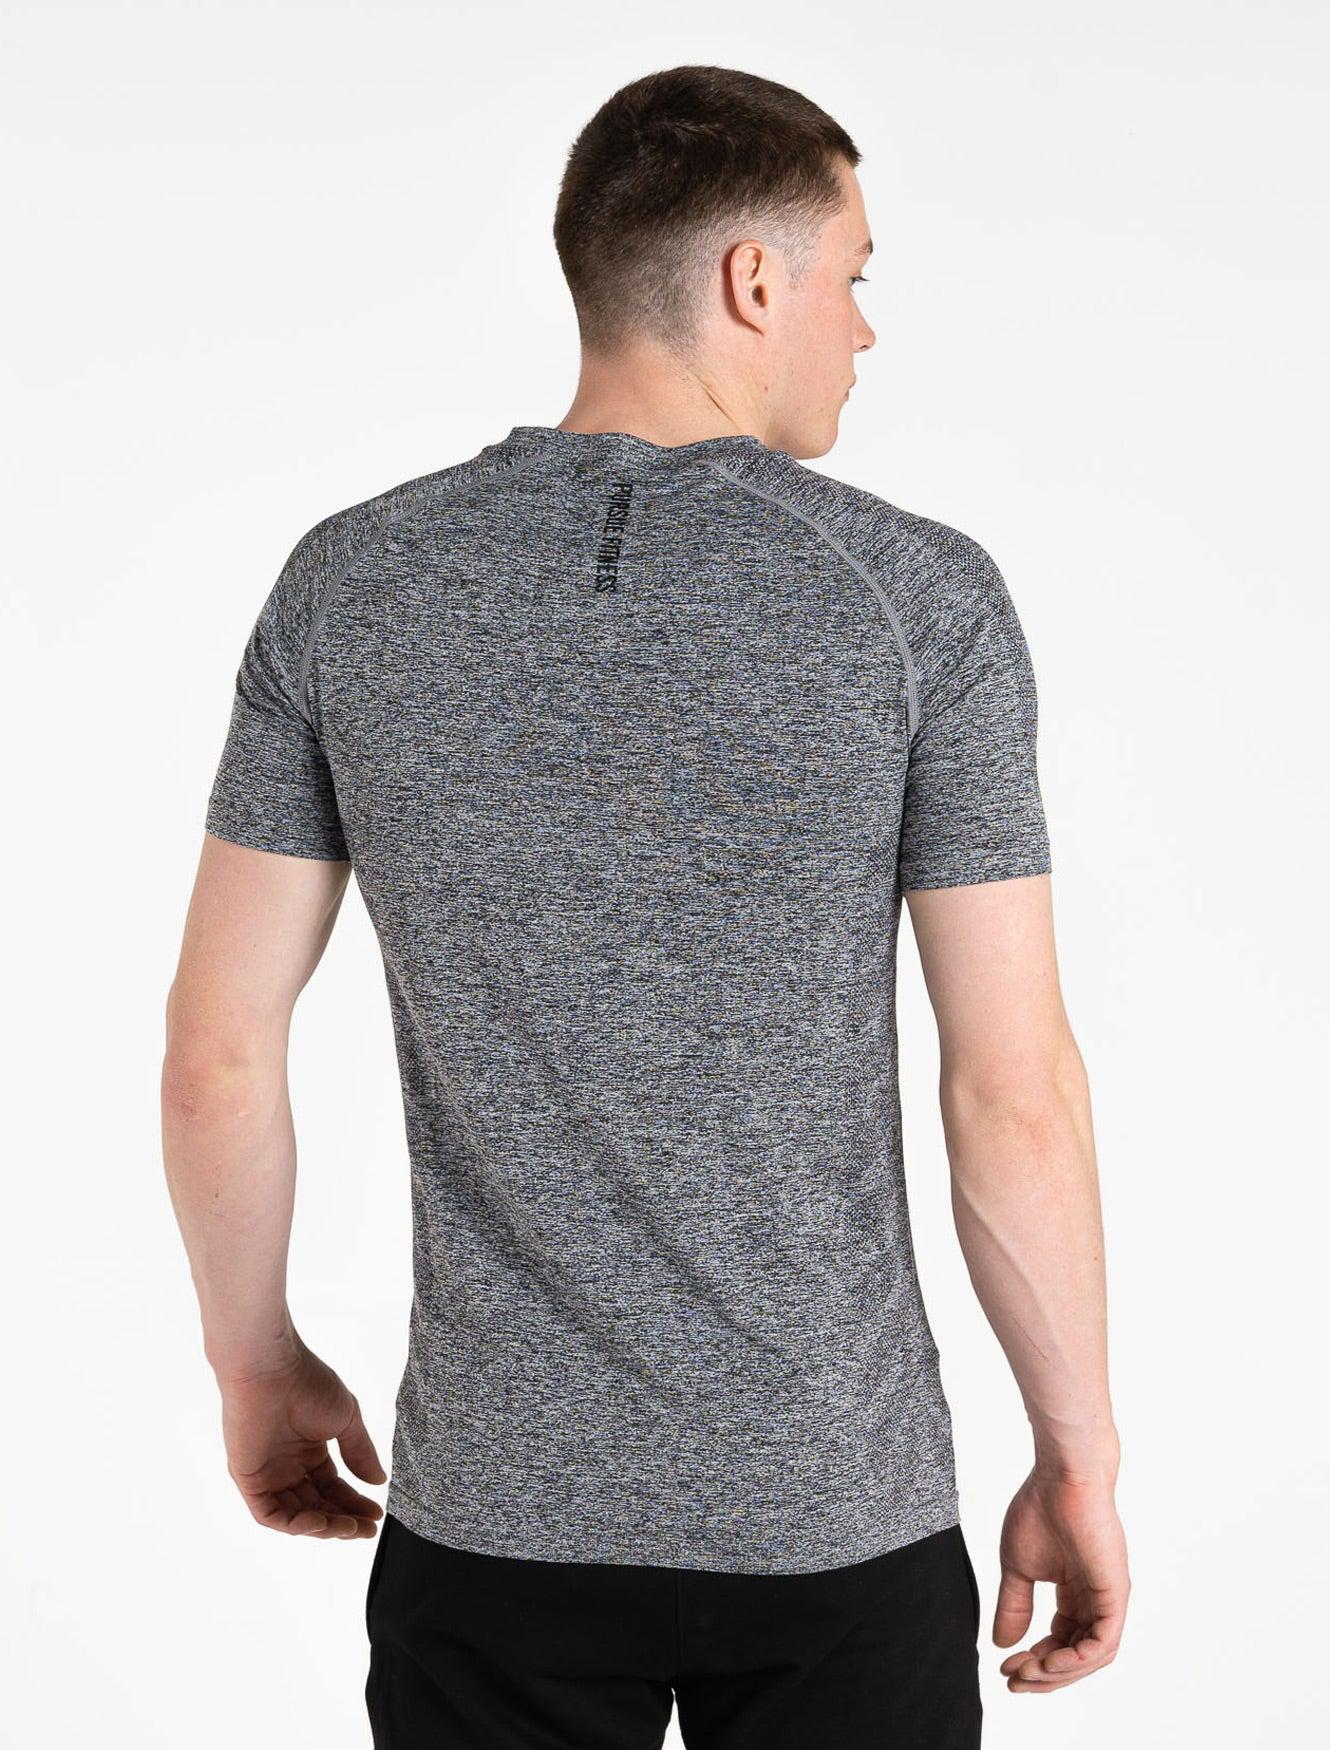 T-shirt (Charcoal) – Reps with Alison Fitness Studio